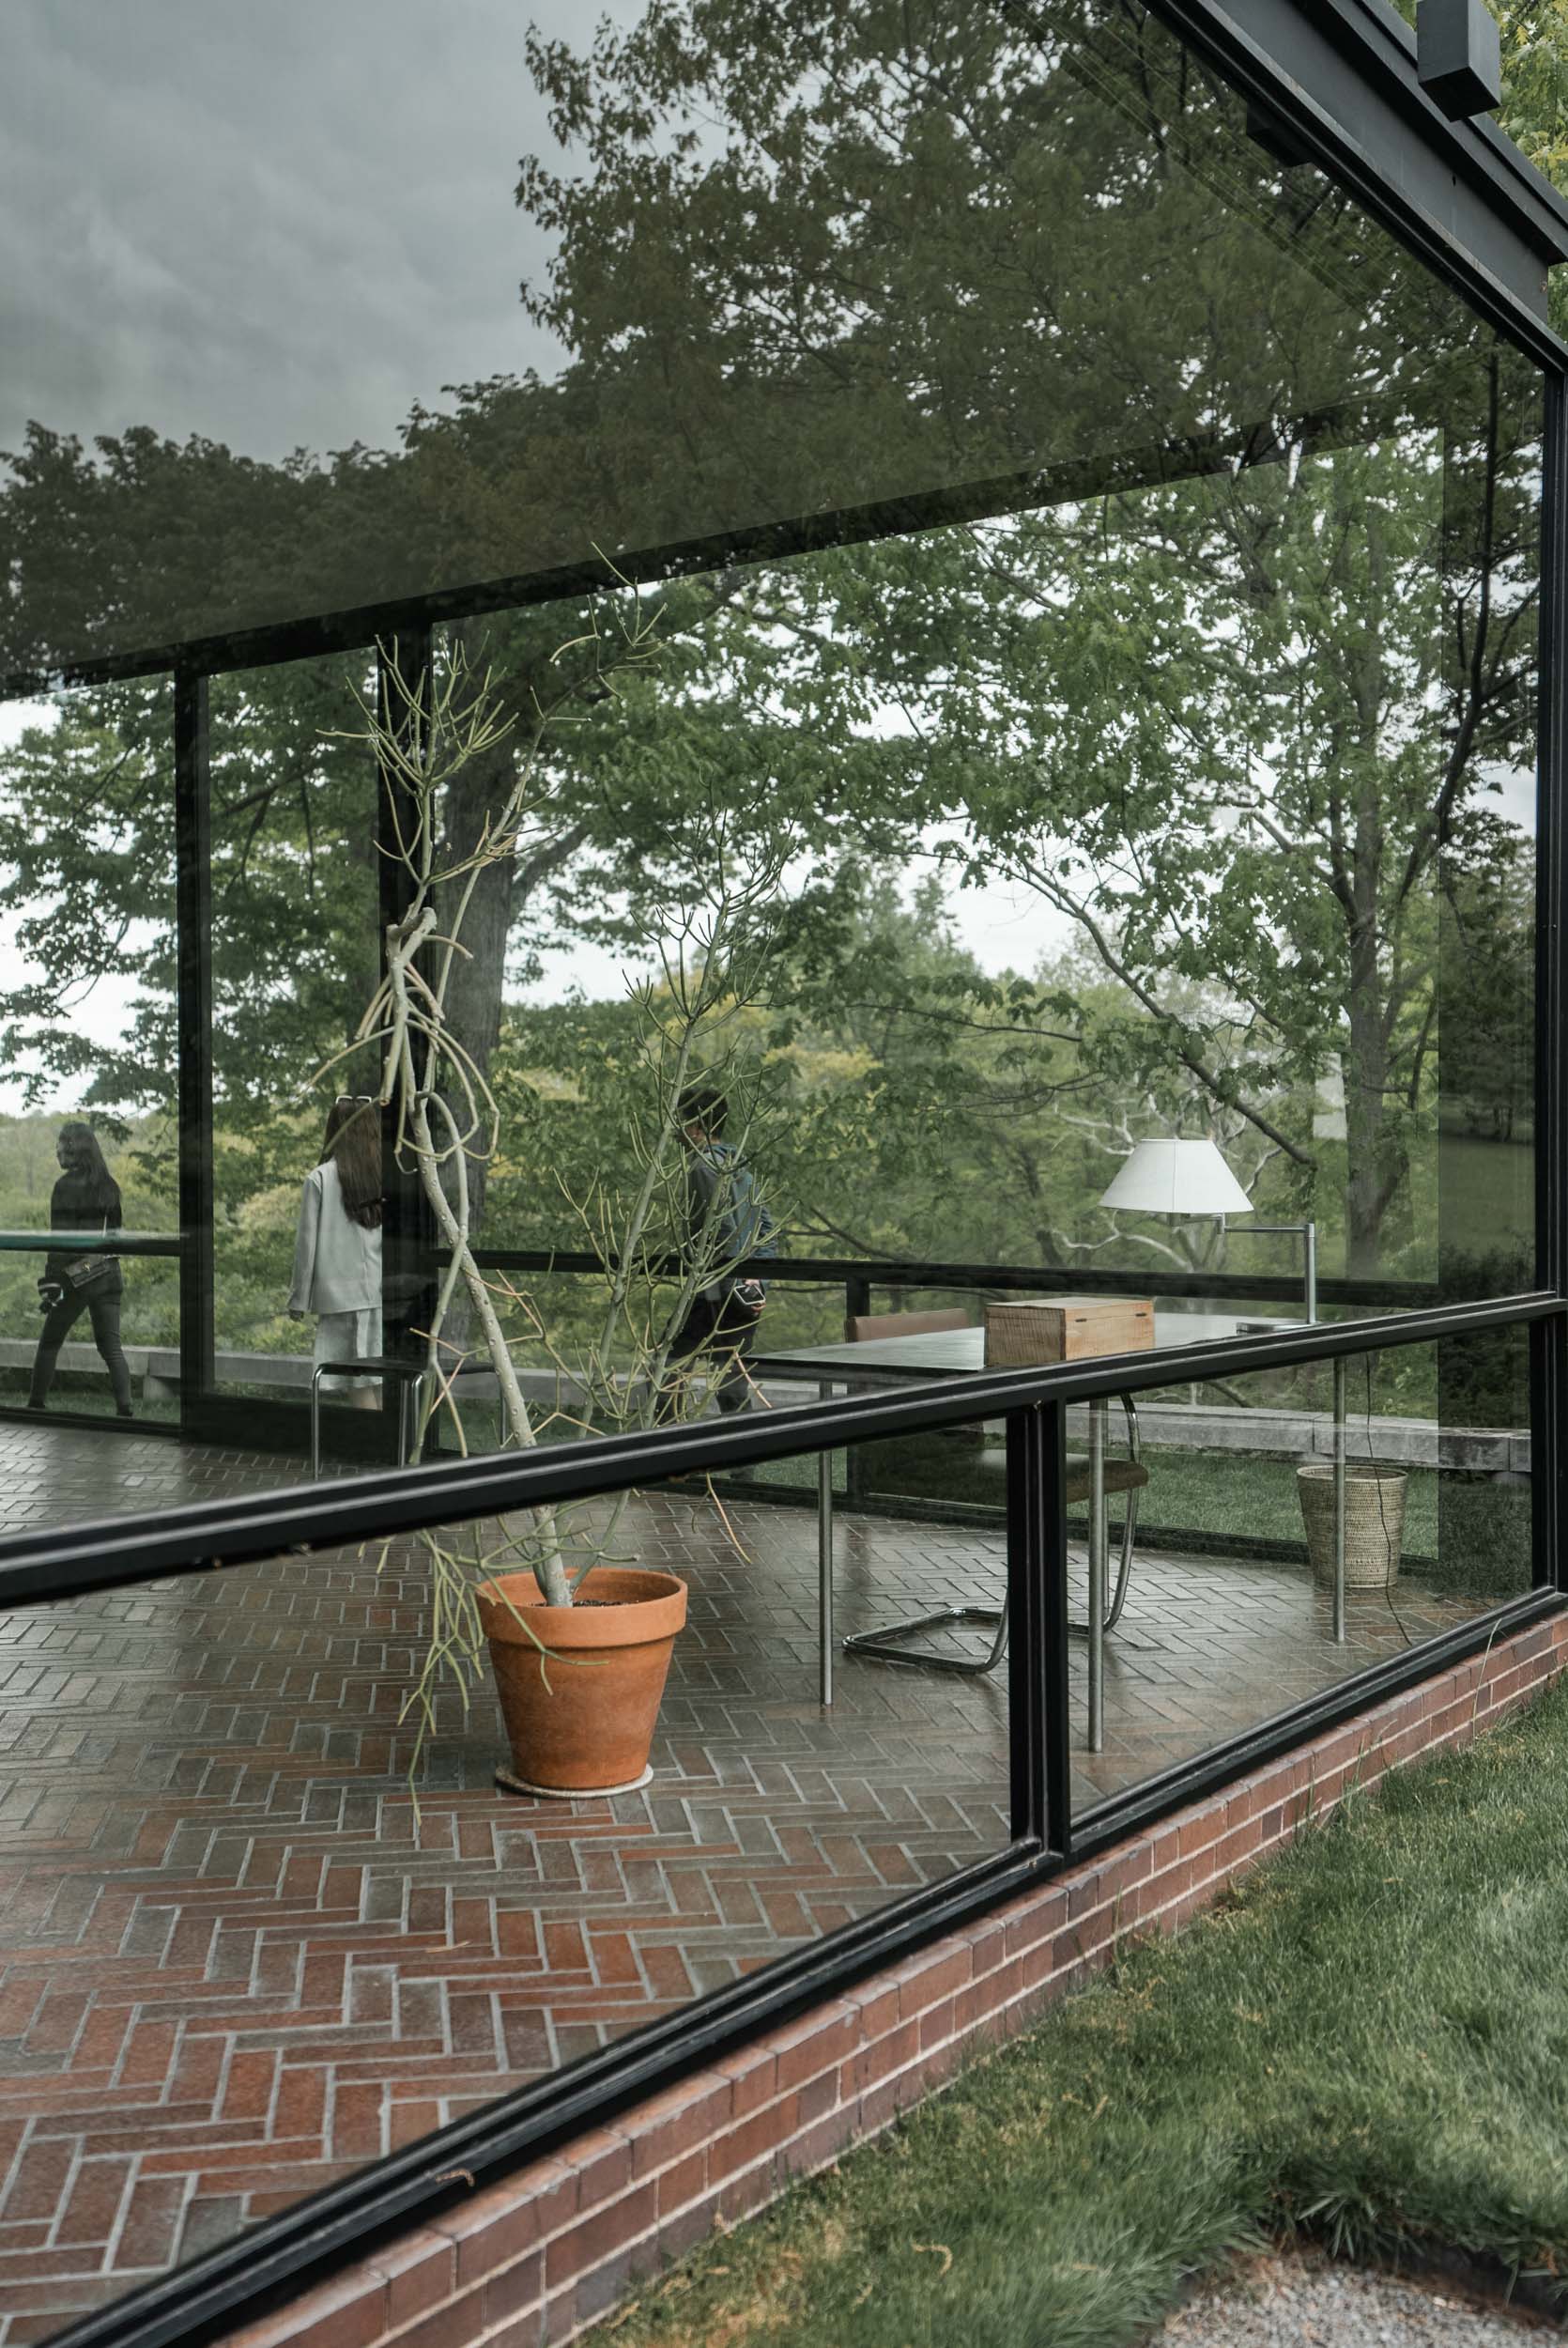 Style and Styles An Trieu The Glass House The Brick House Grace Farms nyc connecticut new canaan